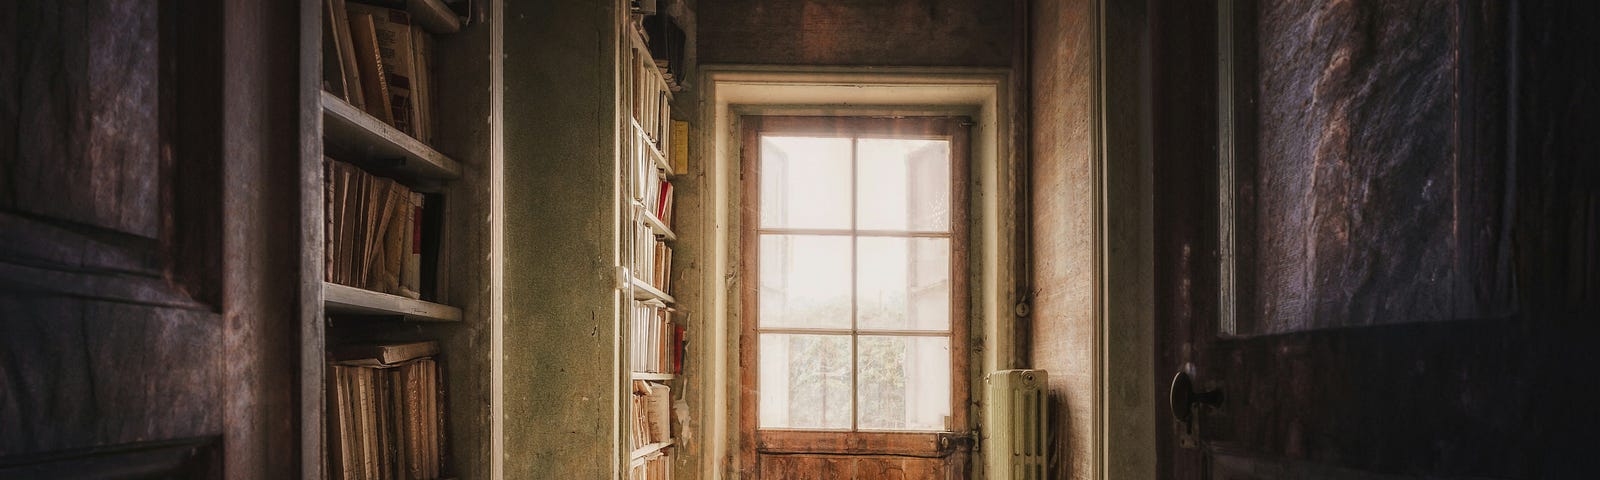 Photo of an old room with a book shelf.